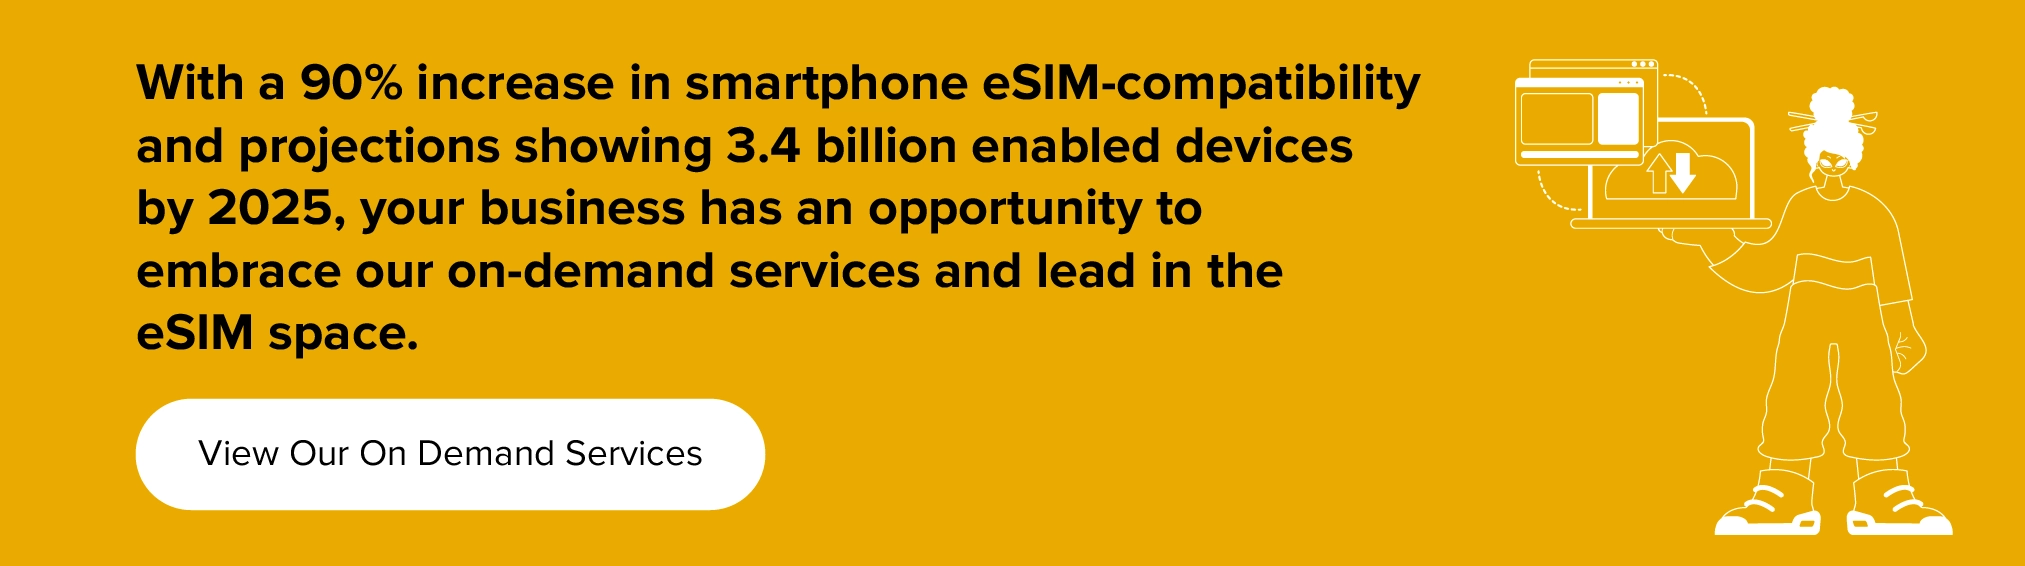 embrace our on-demand services and lead in the eSIM space